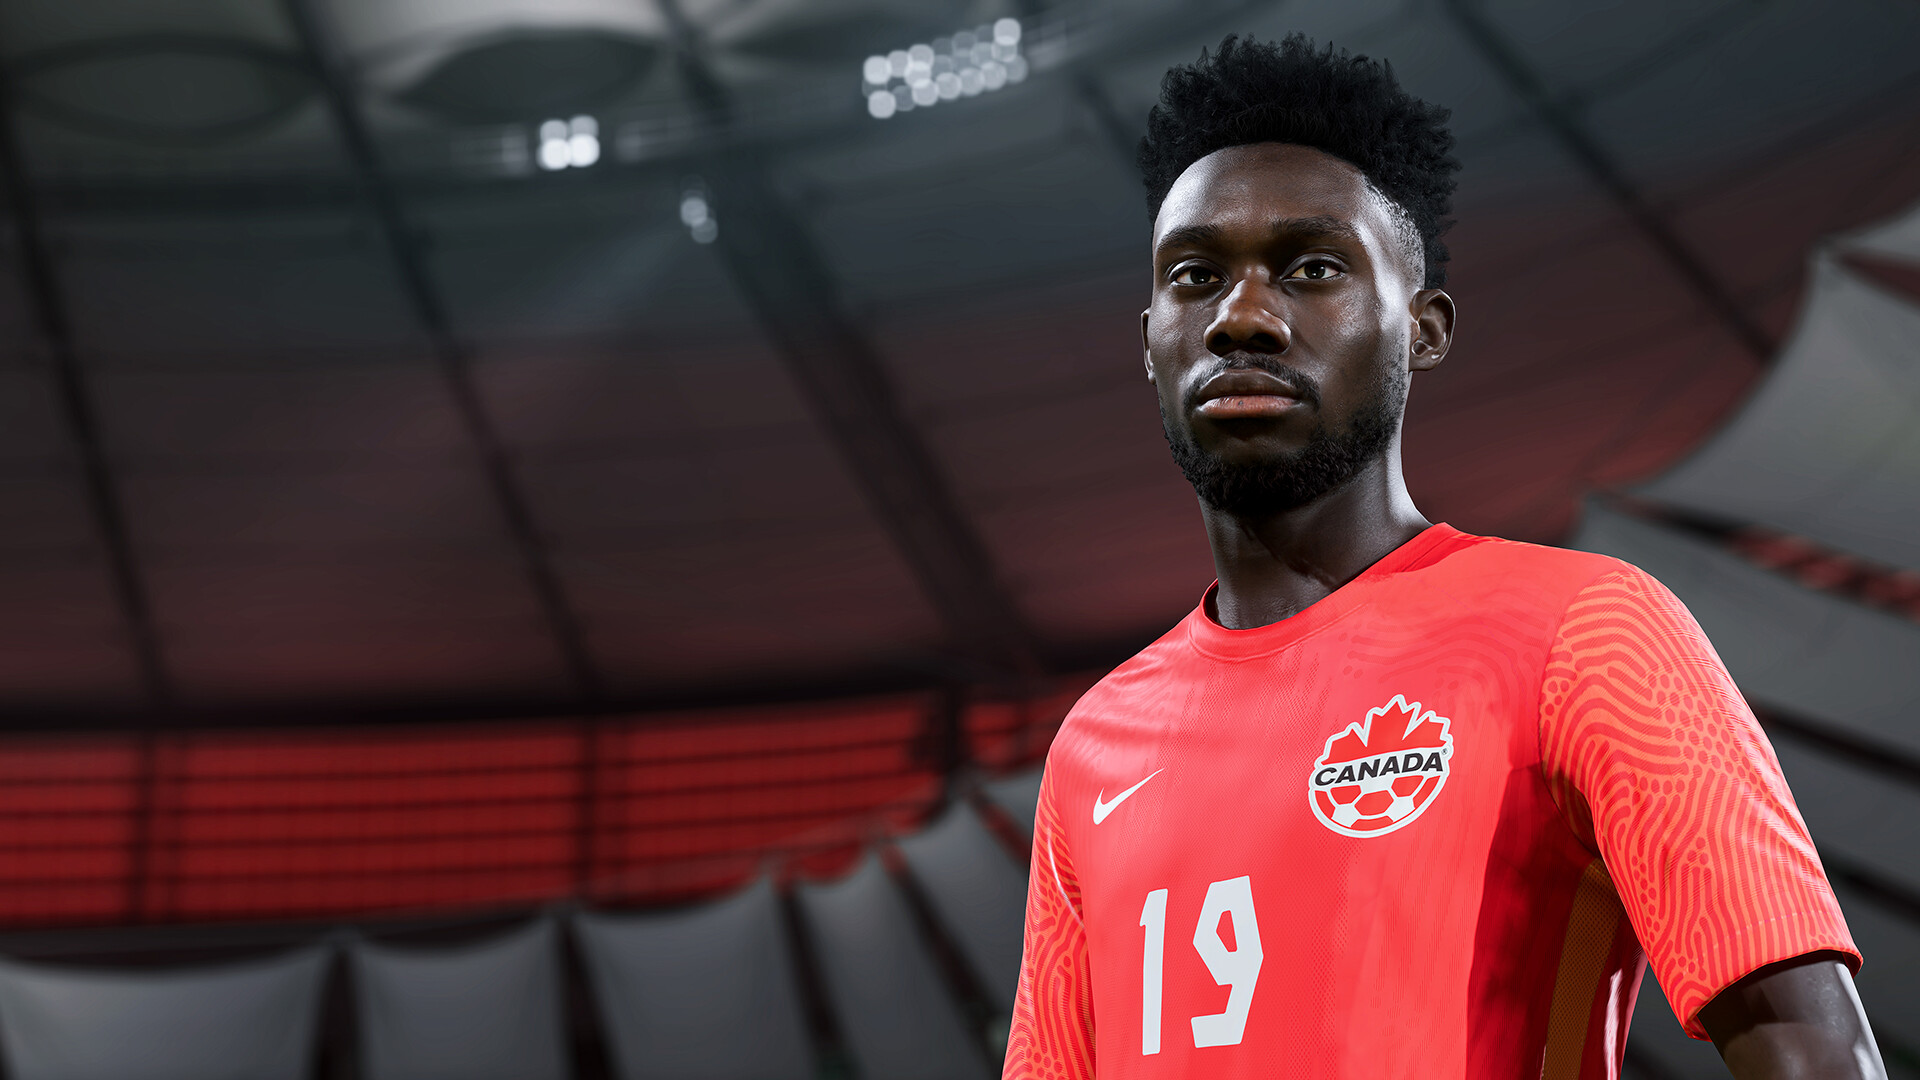 FIFA 23 system requirements